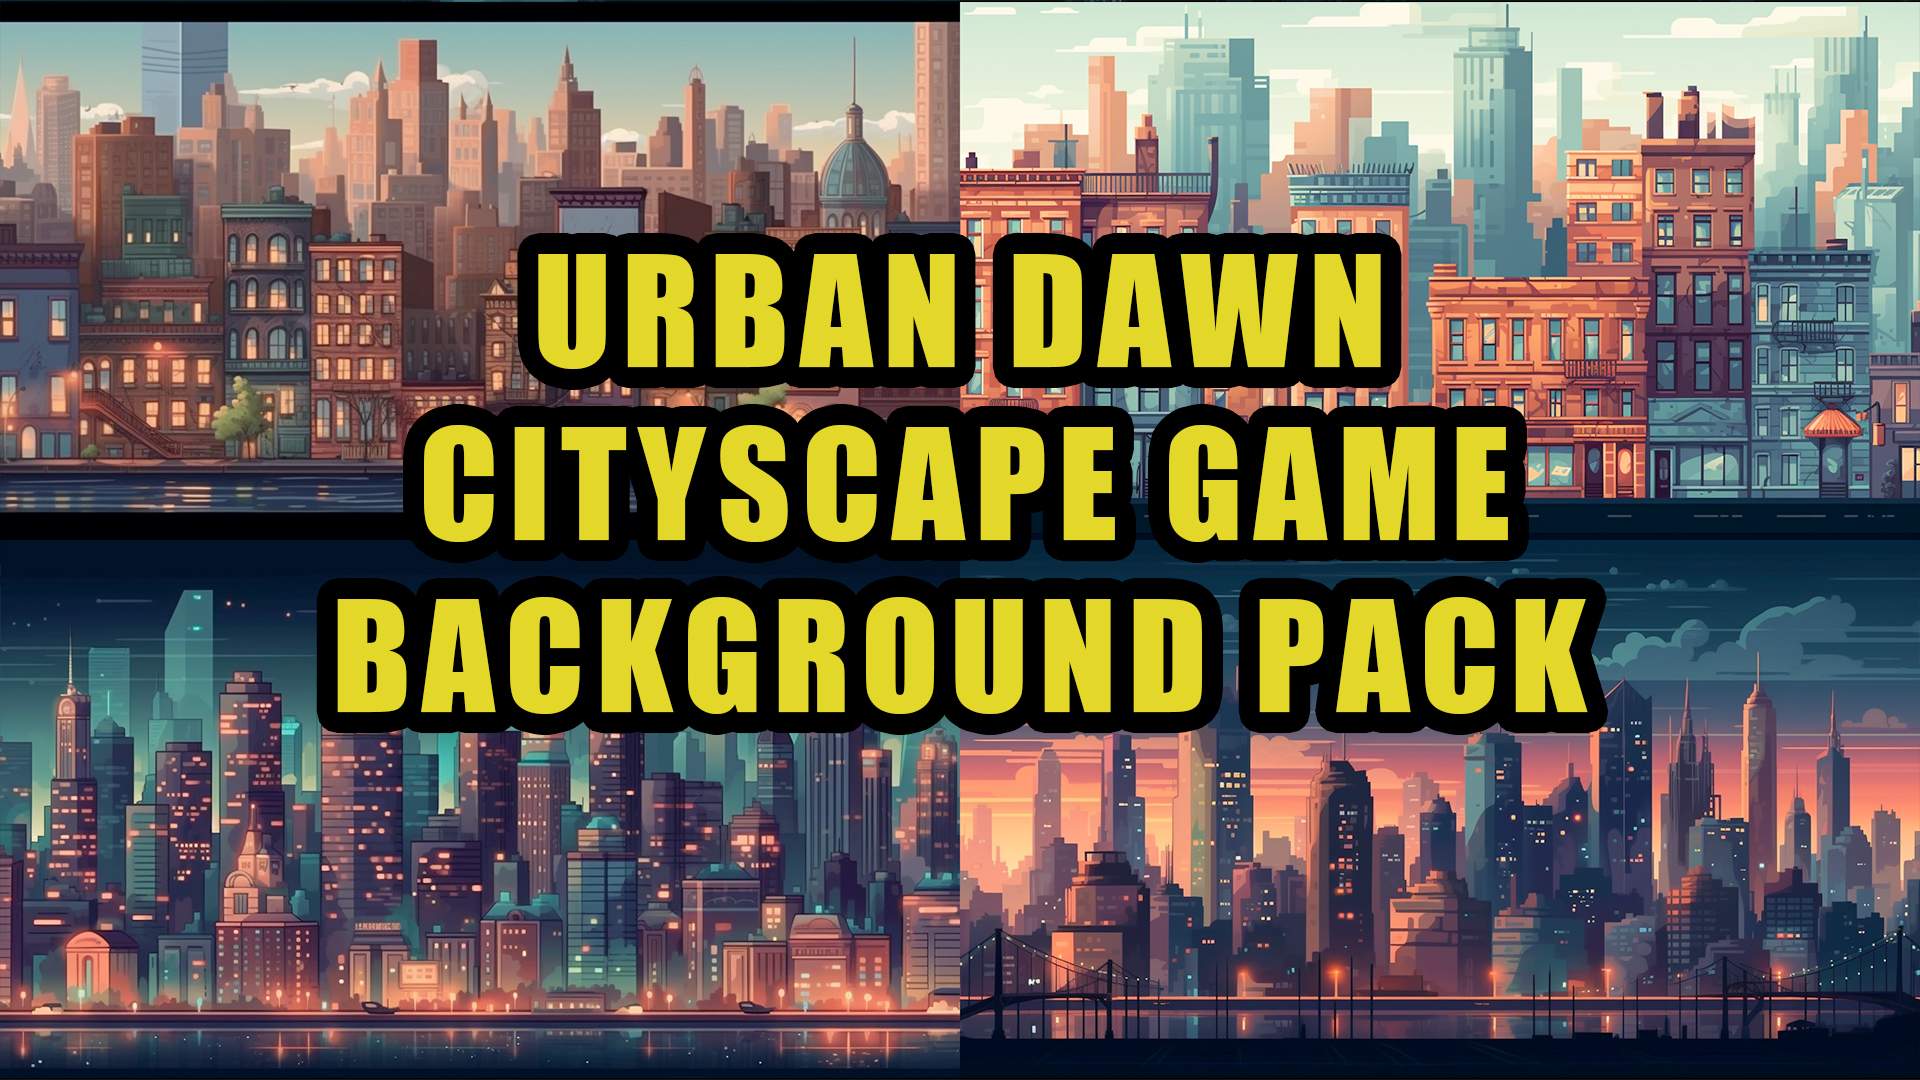 Urban Dawn Cityscape Game Tiled Background Pack